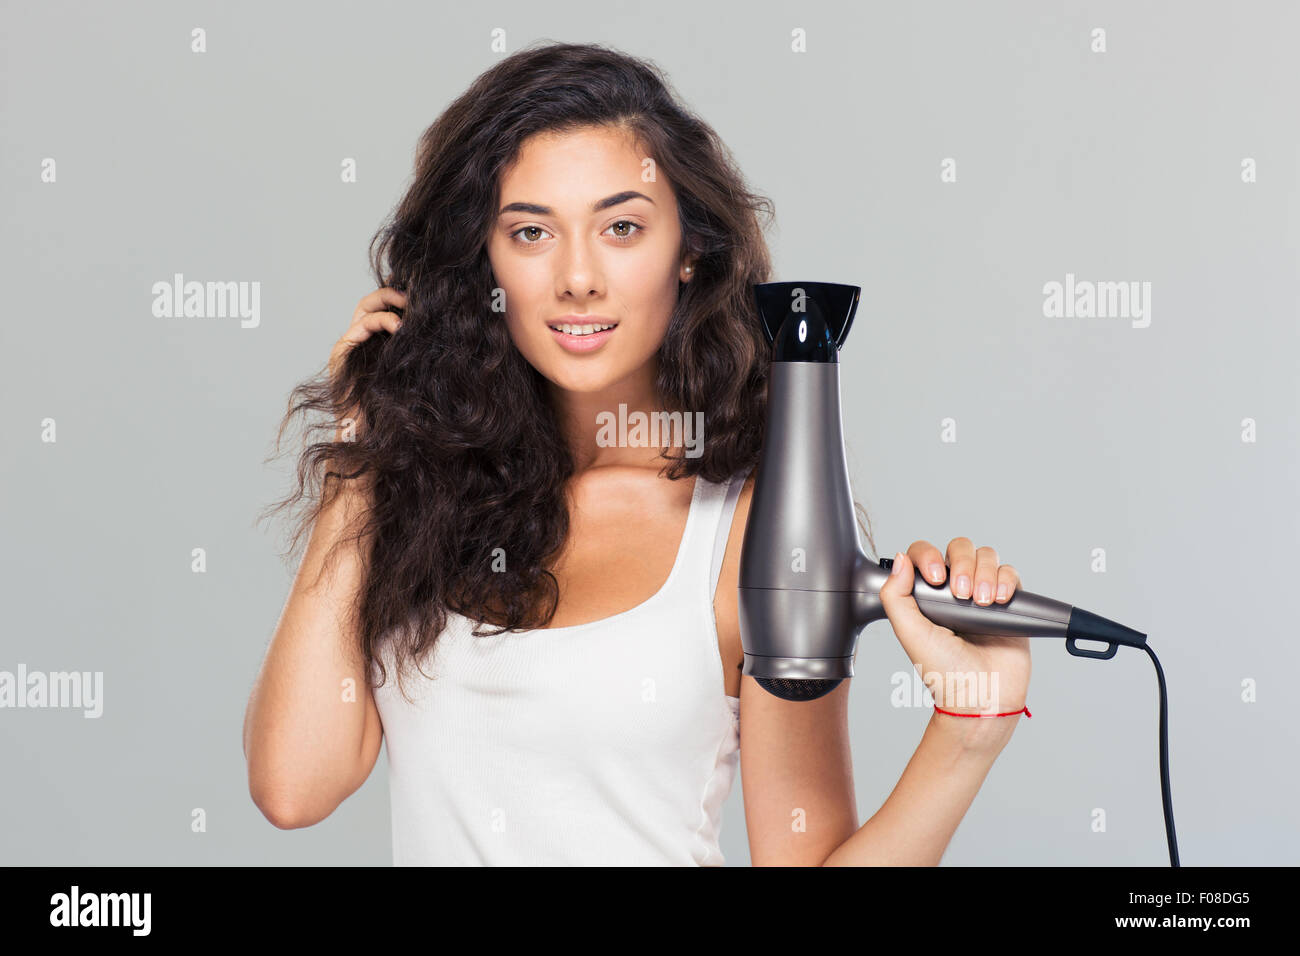 Happy beautiful woman holding hairdryer over gray background. Looking at camera Stock Photo